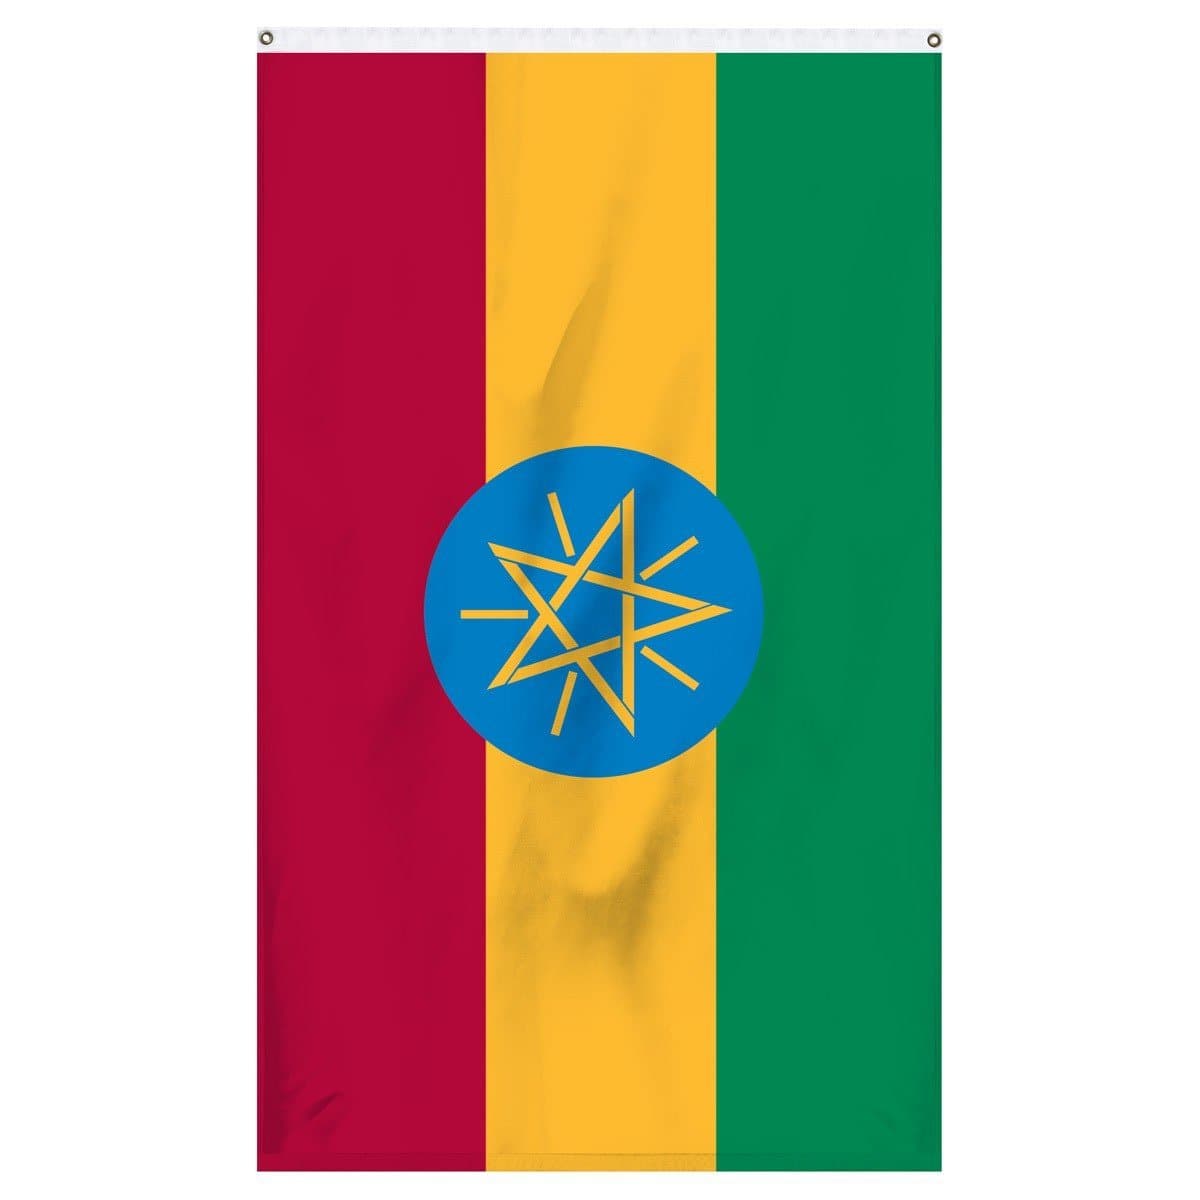 Buy a Ethiopia flag online which we have for sale